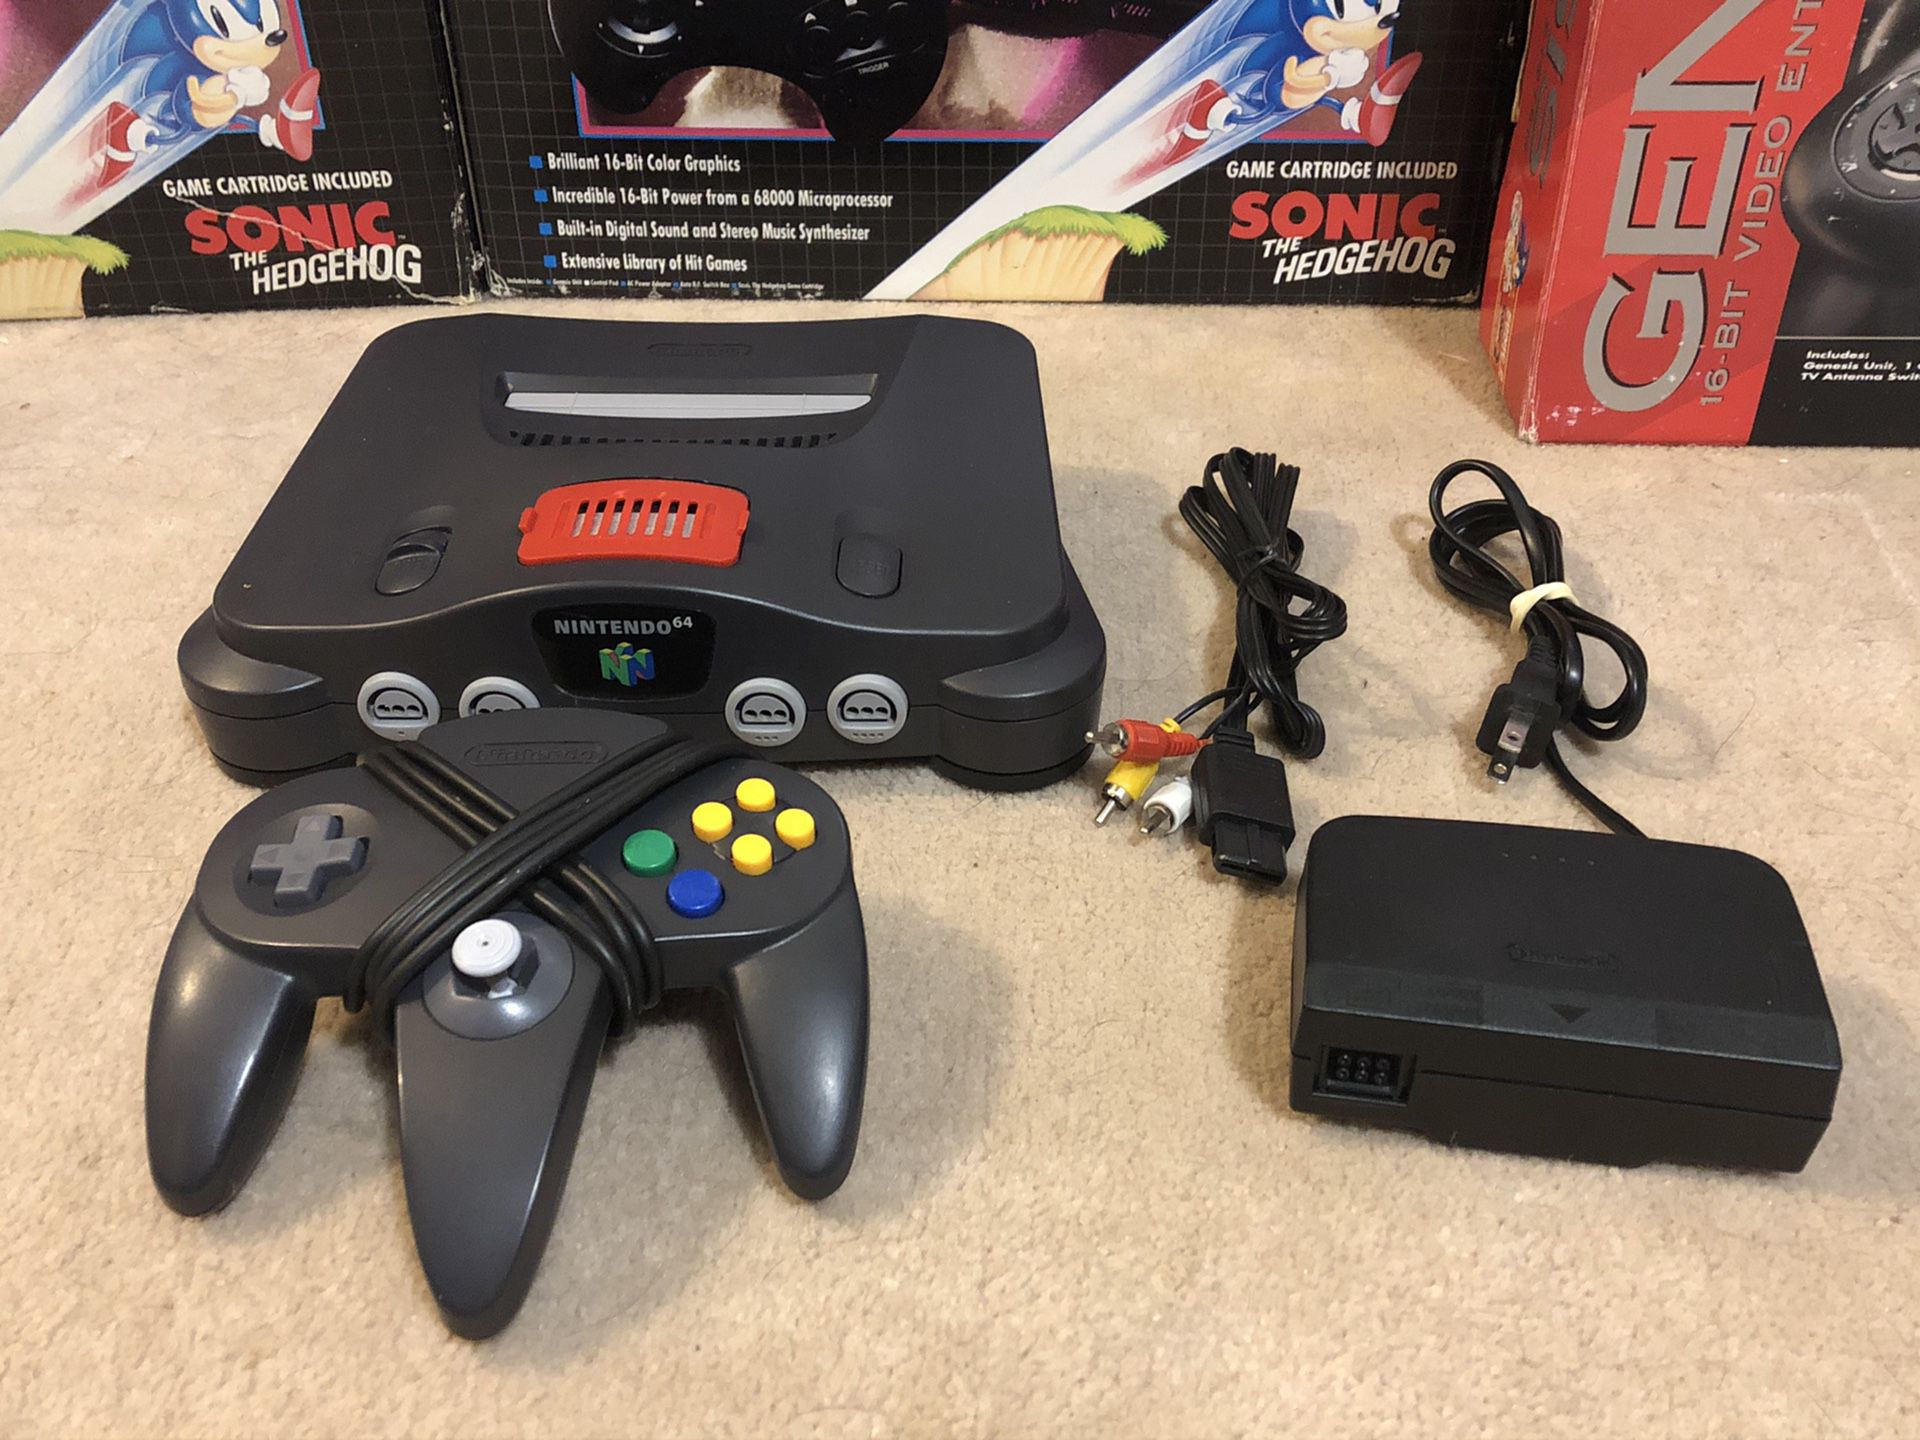 Nintendo N64 Video Game System with Memory Expansion